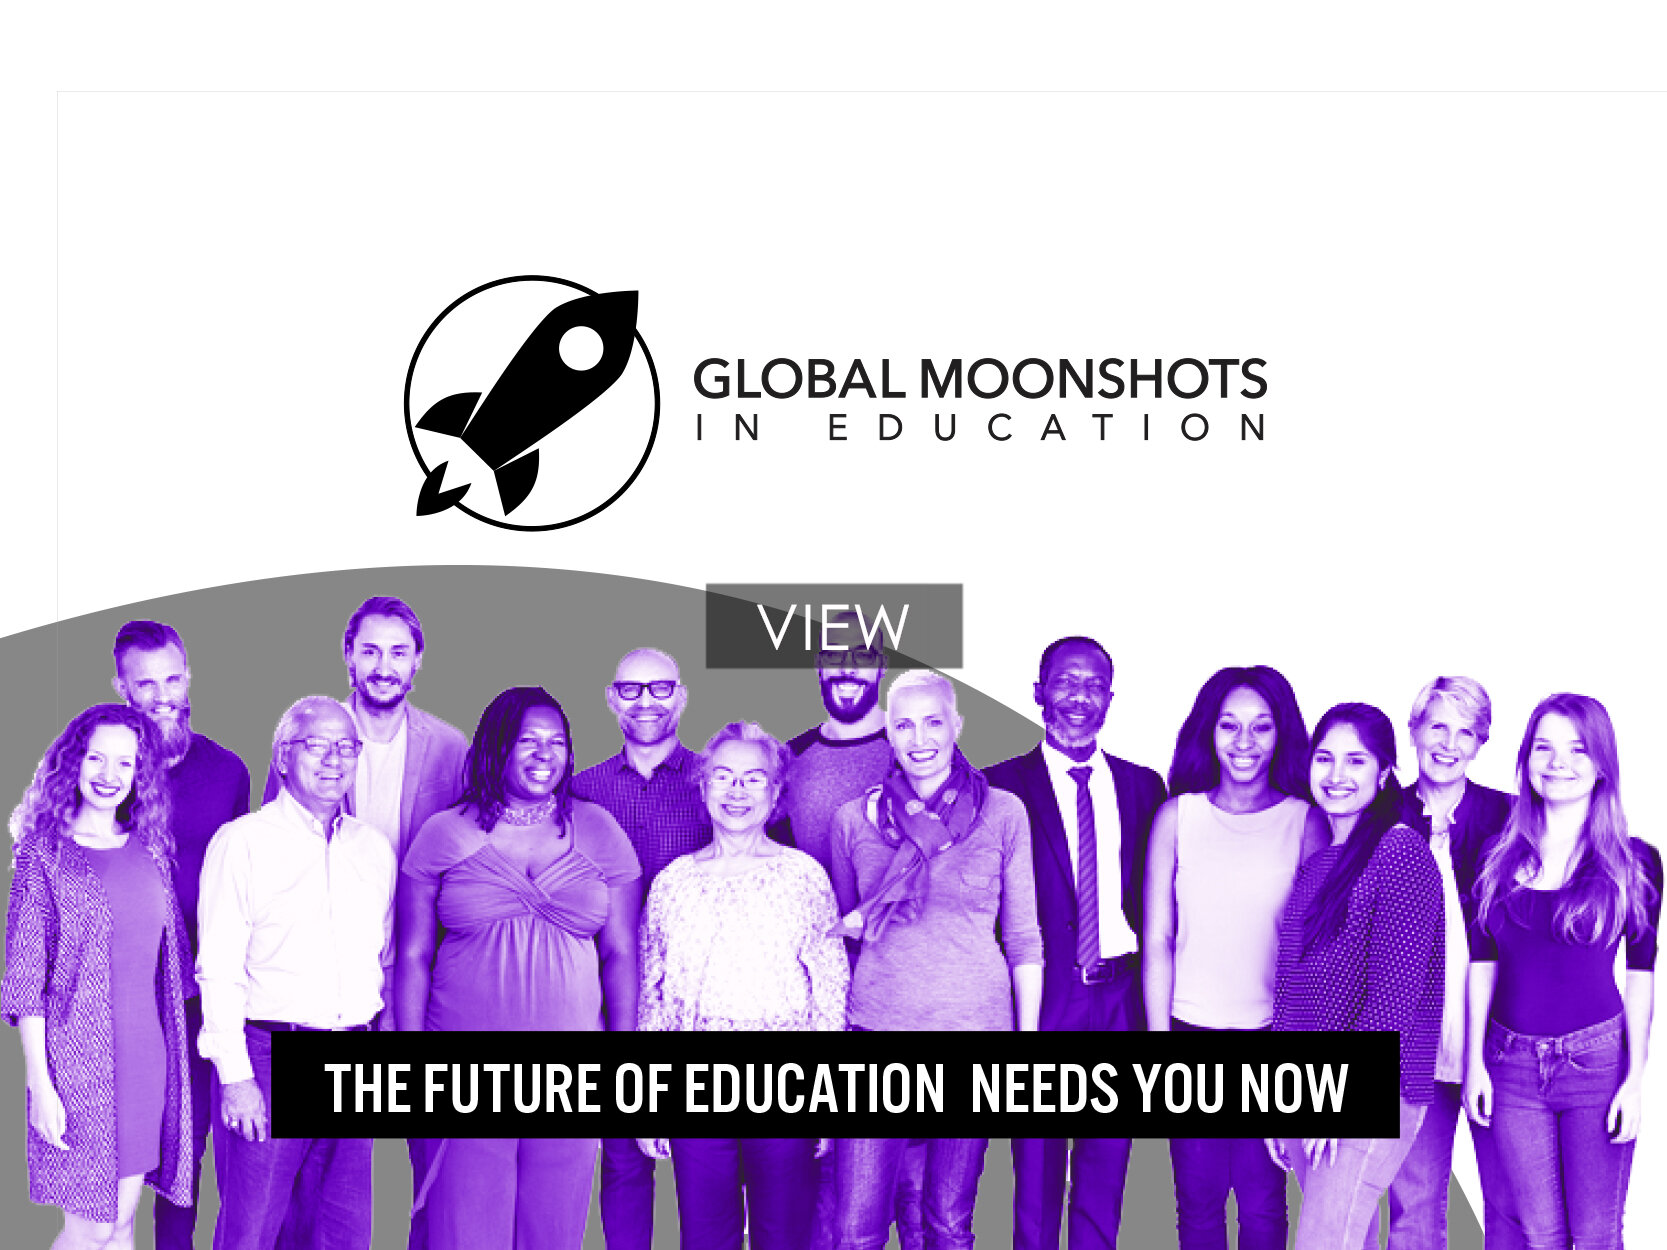 GLOBAL MOONSHOTS IN EDUCATION: ENGAGEMENT STRATEGY